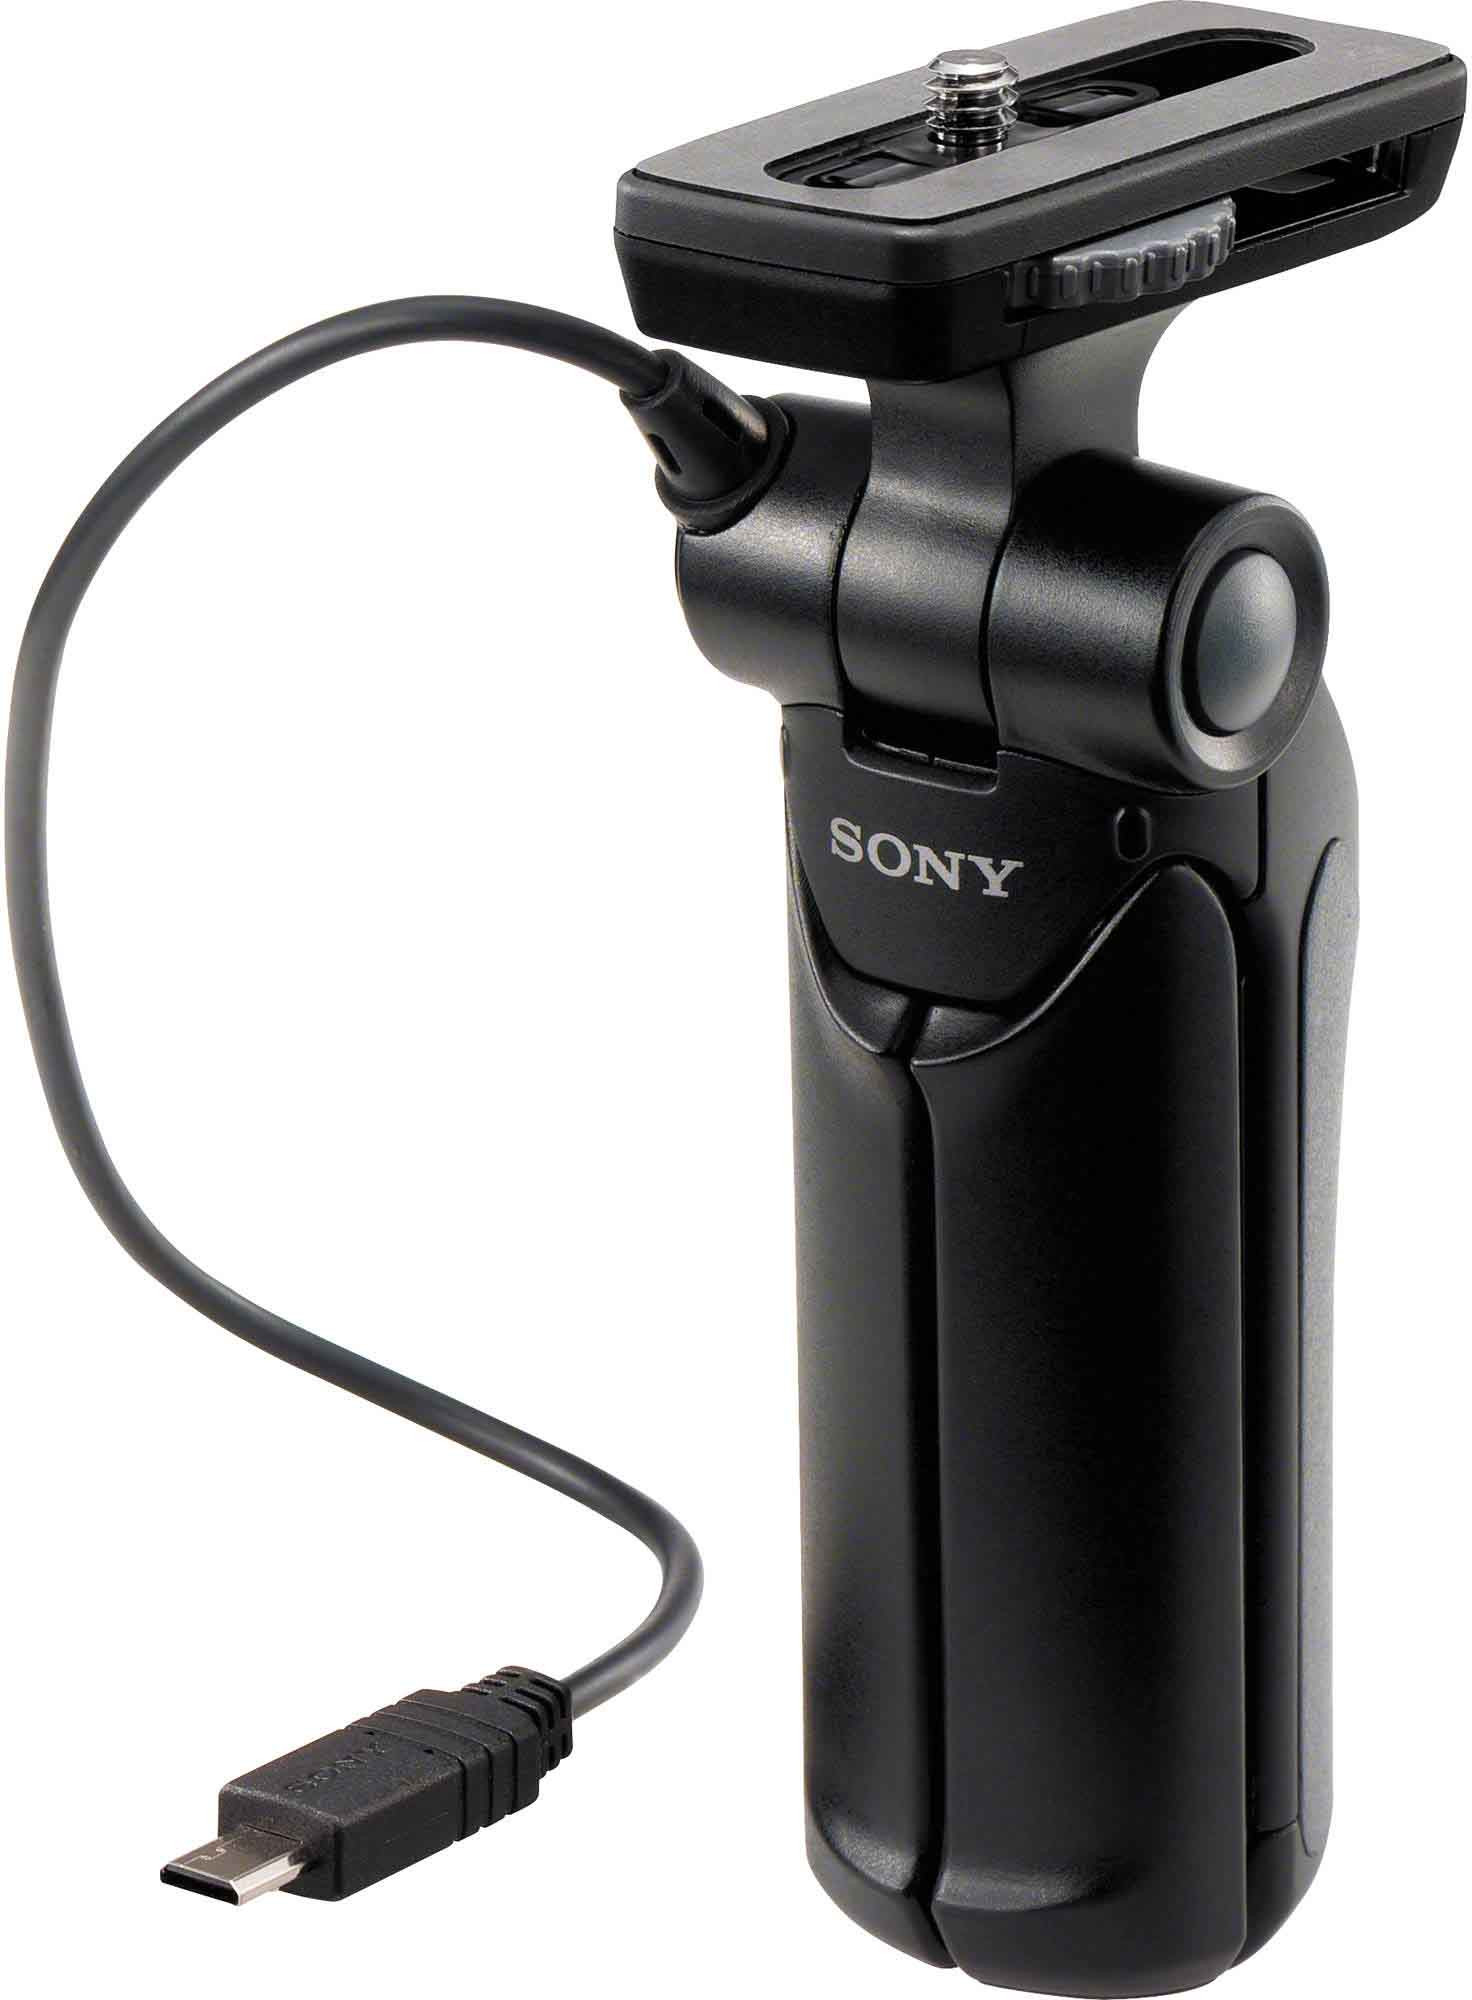 SONY GPVPT1.CE7